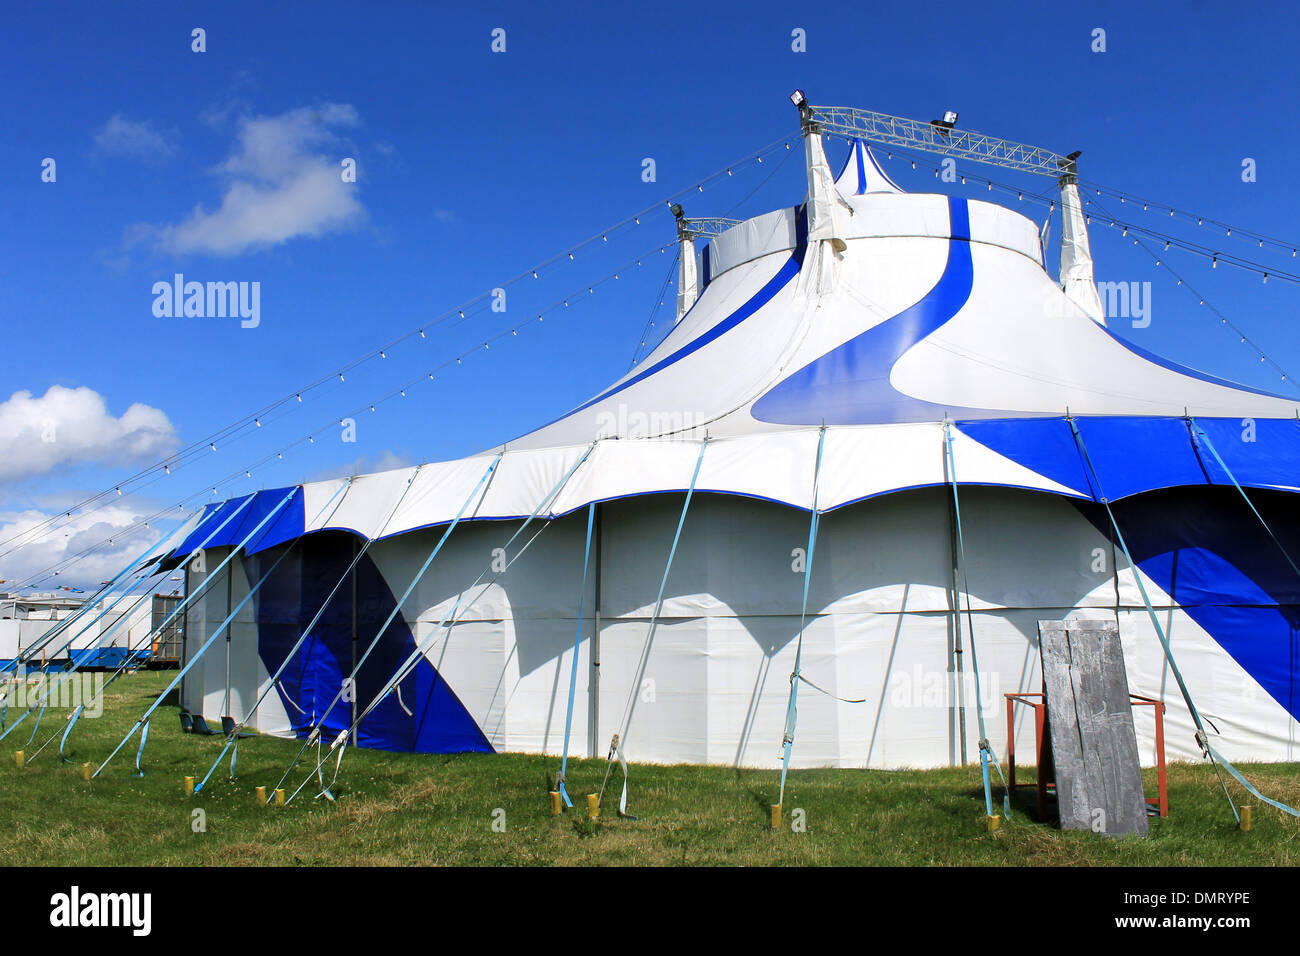 Blue and white striped circus tent in field. Stock Photo